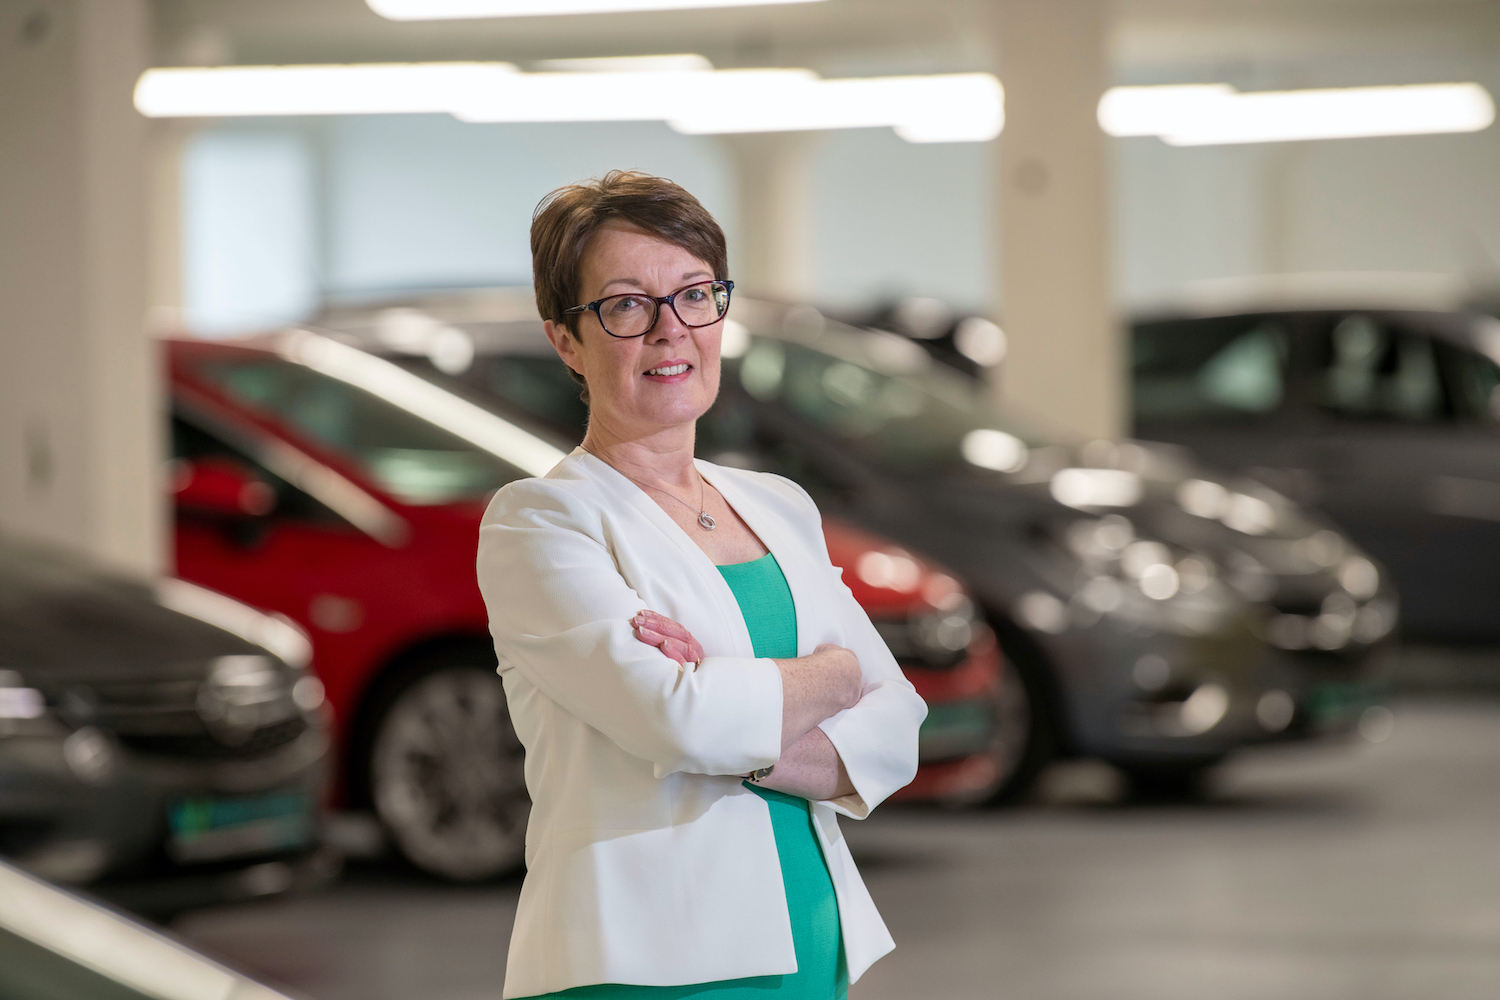 Windsor Group opens MotorMall in Galway